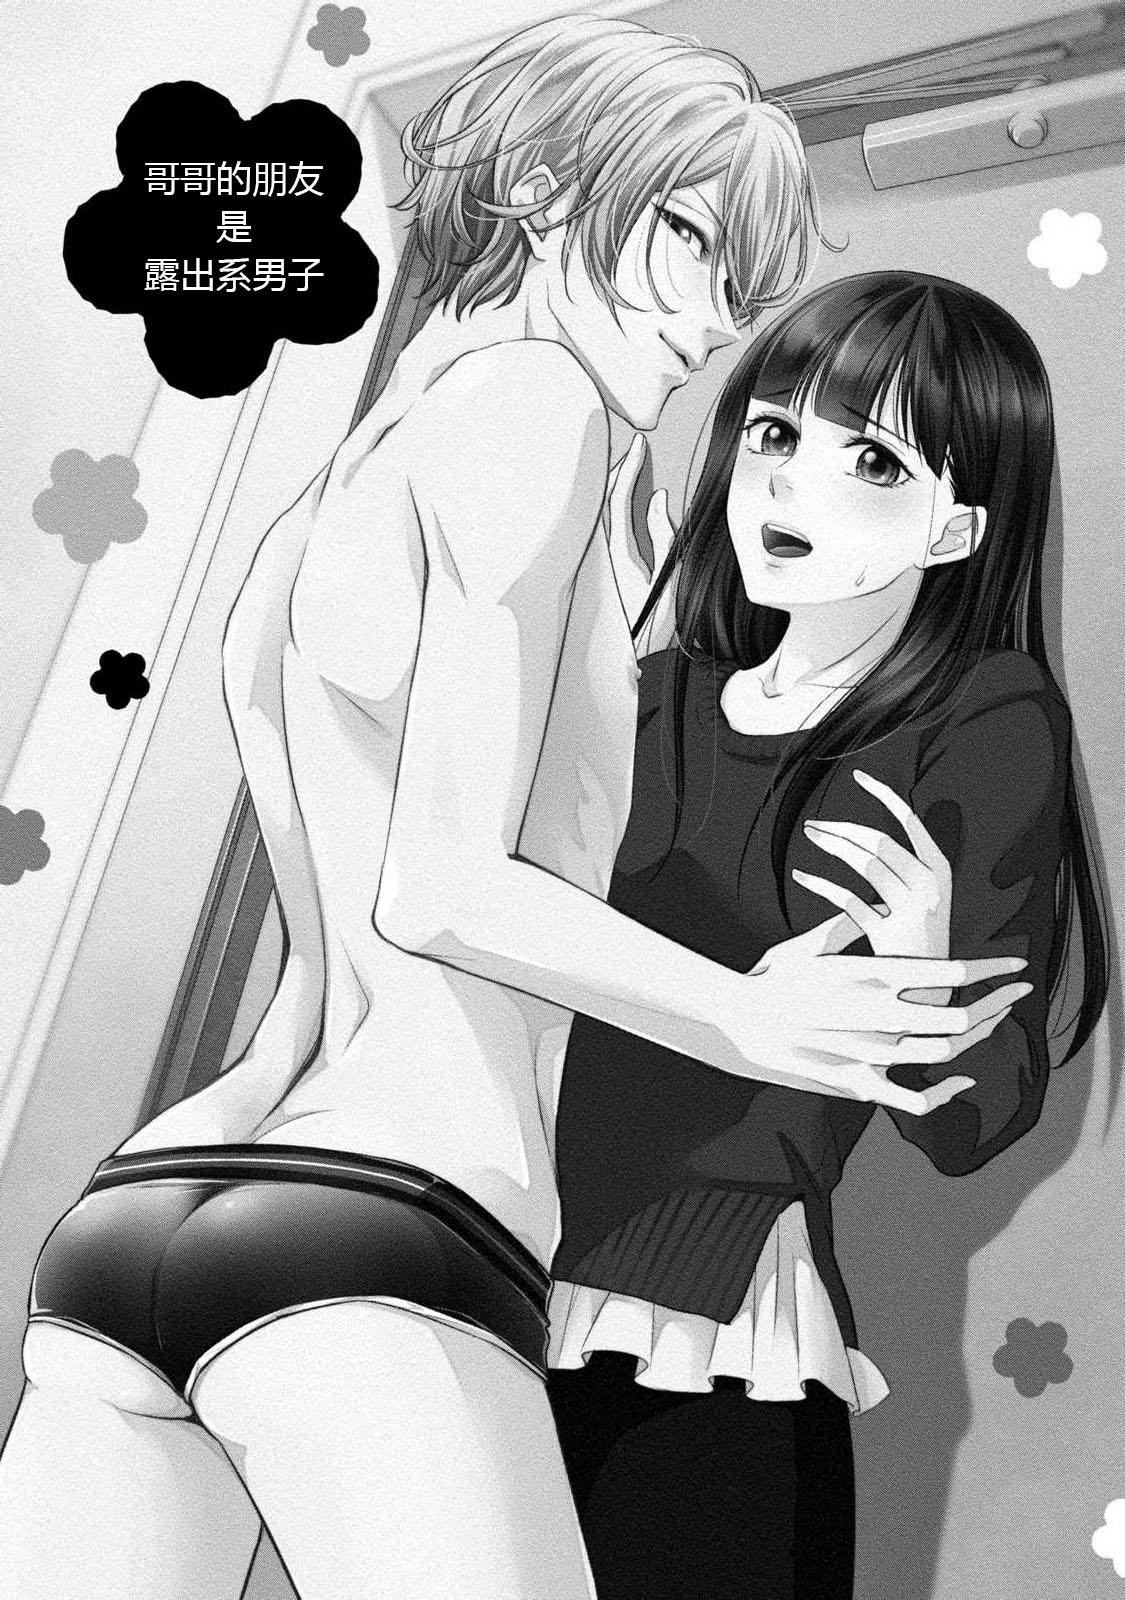 Online If my brother's friend was a male of exposure | 哥哥的朋友是露出系男子 Lez Hardcore - Page 2